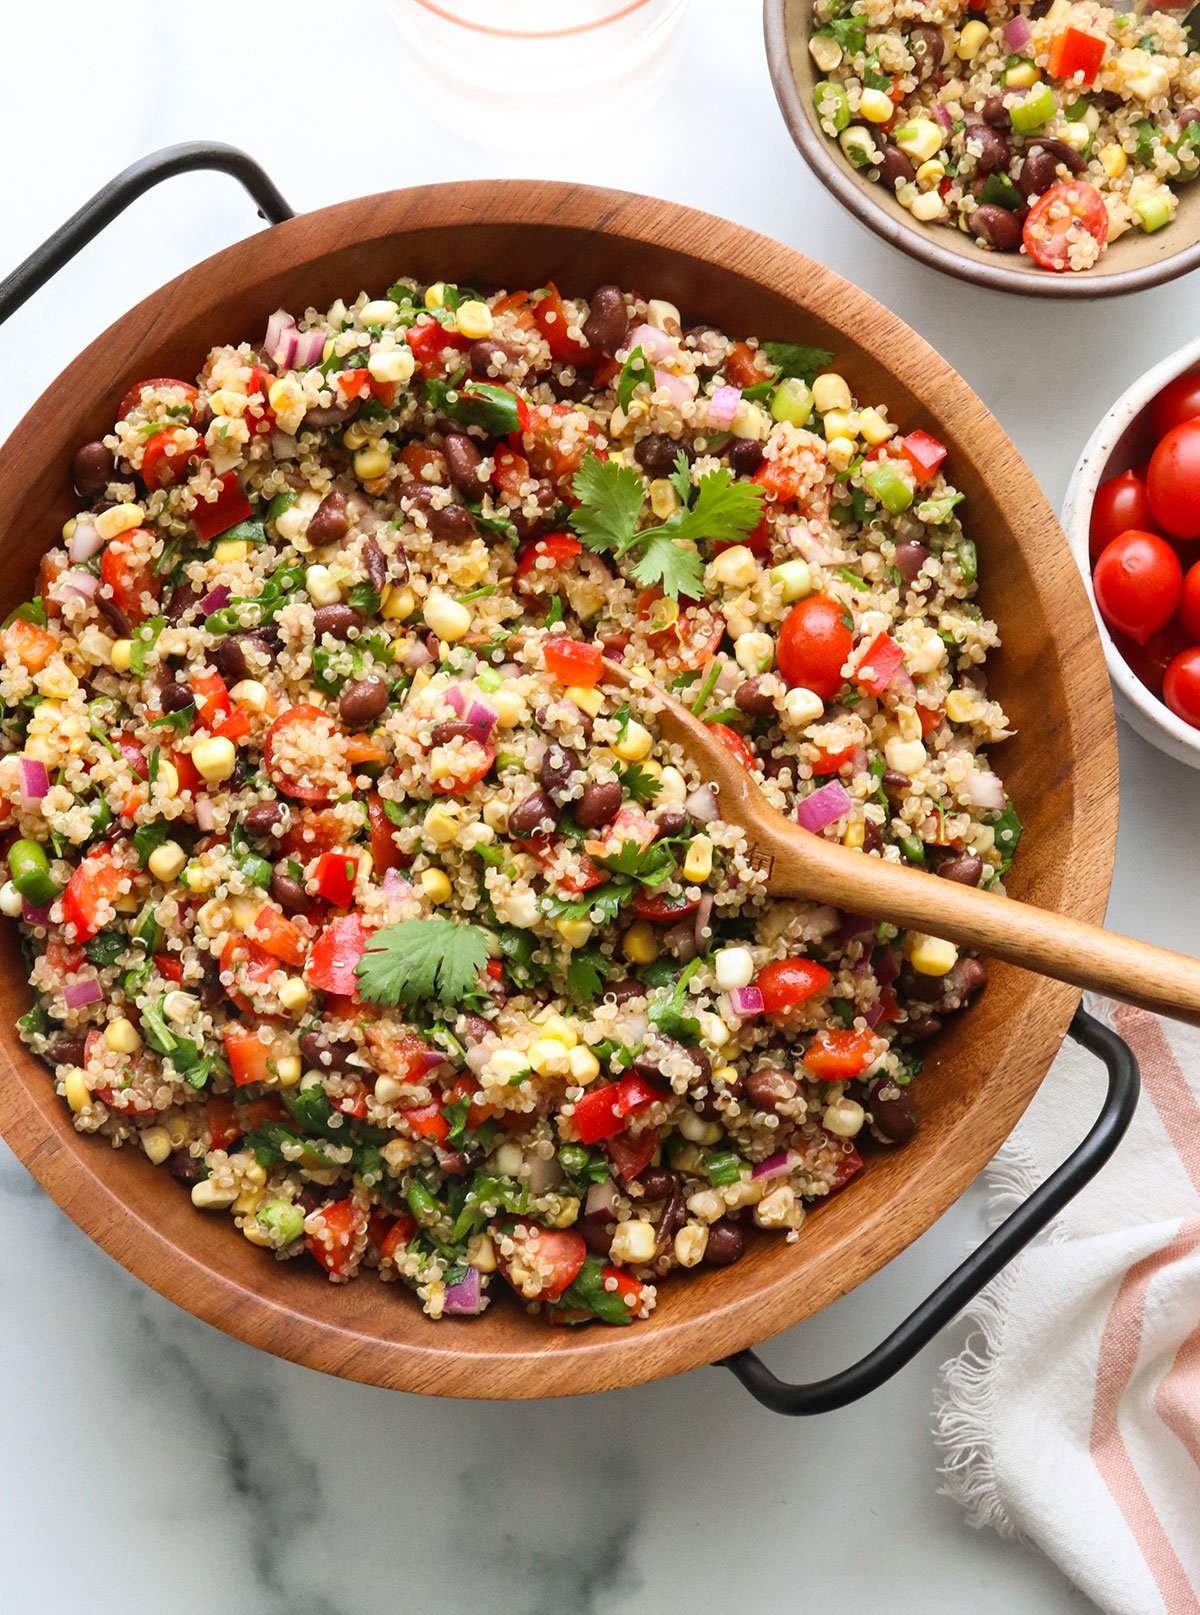 quinoa salad served in a wooden bowl with cilantro on top.